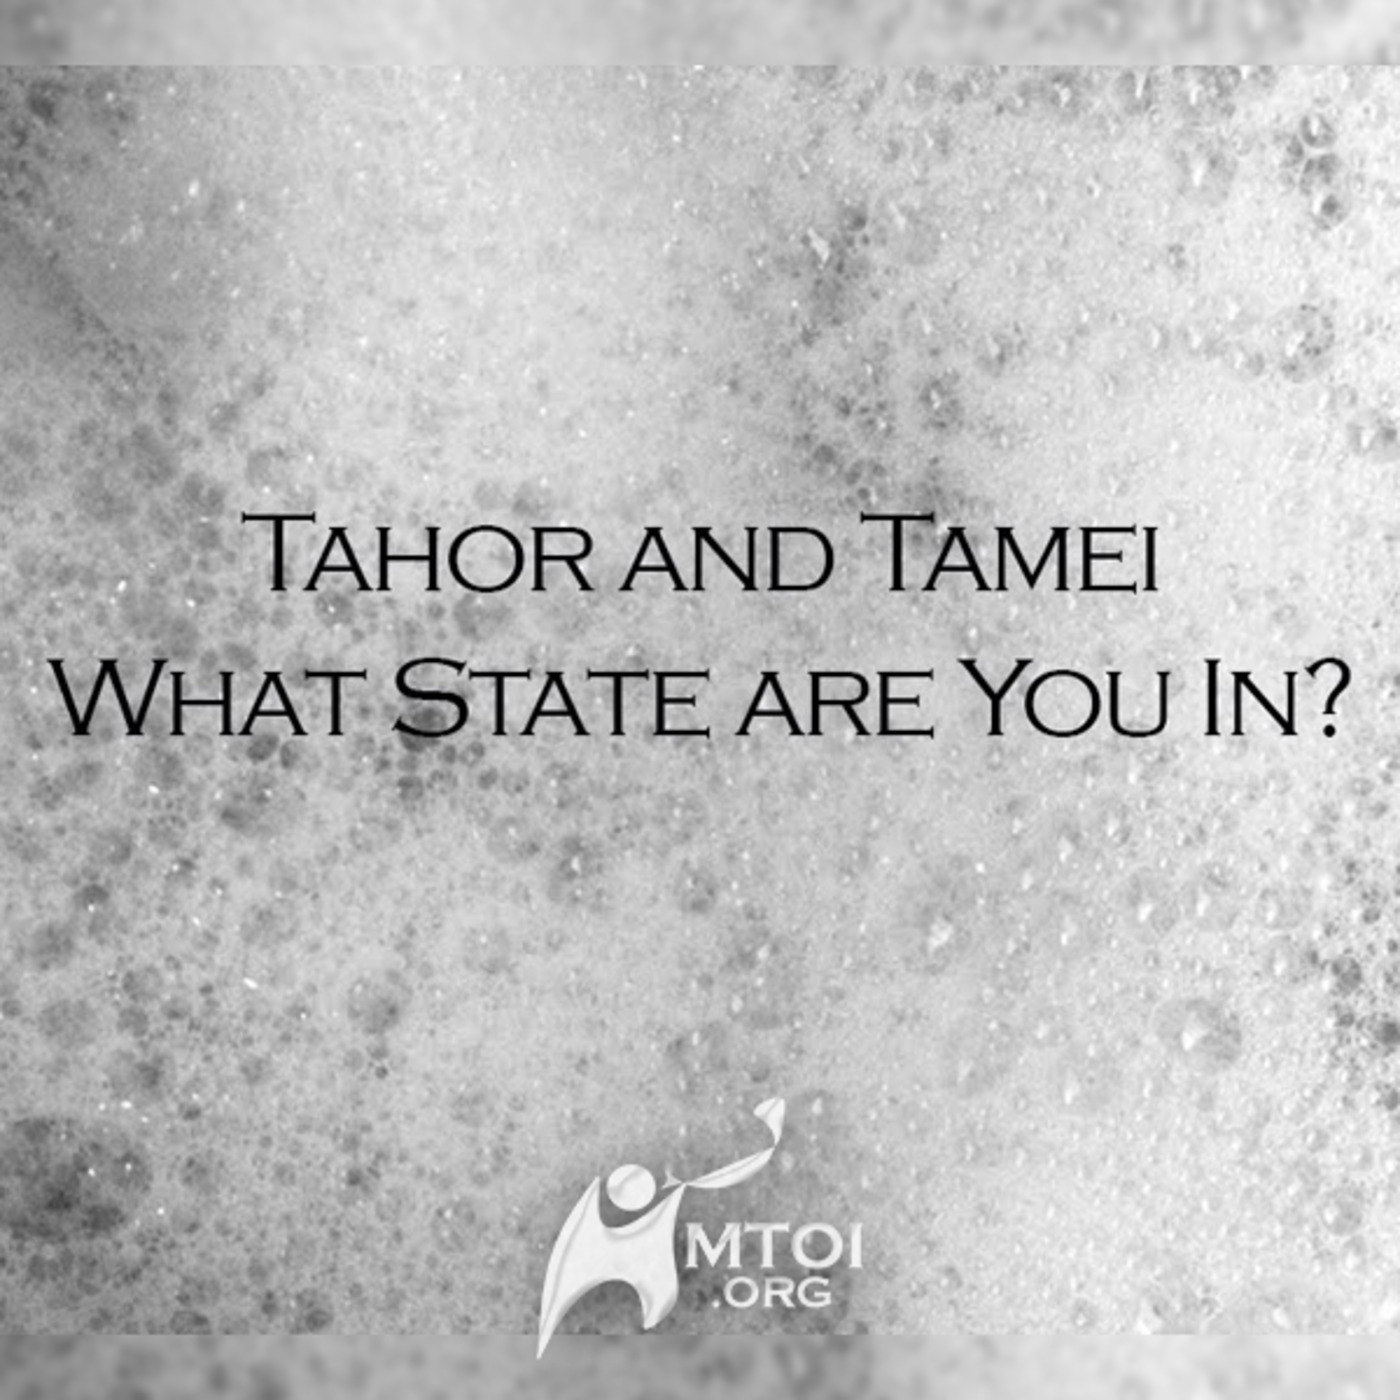 Episode 708: Tahor and Tamei: What State are You In?